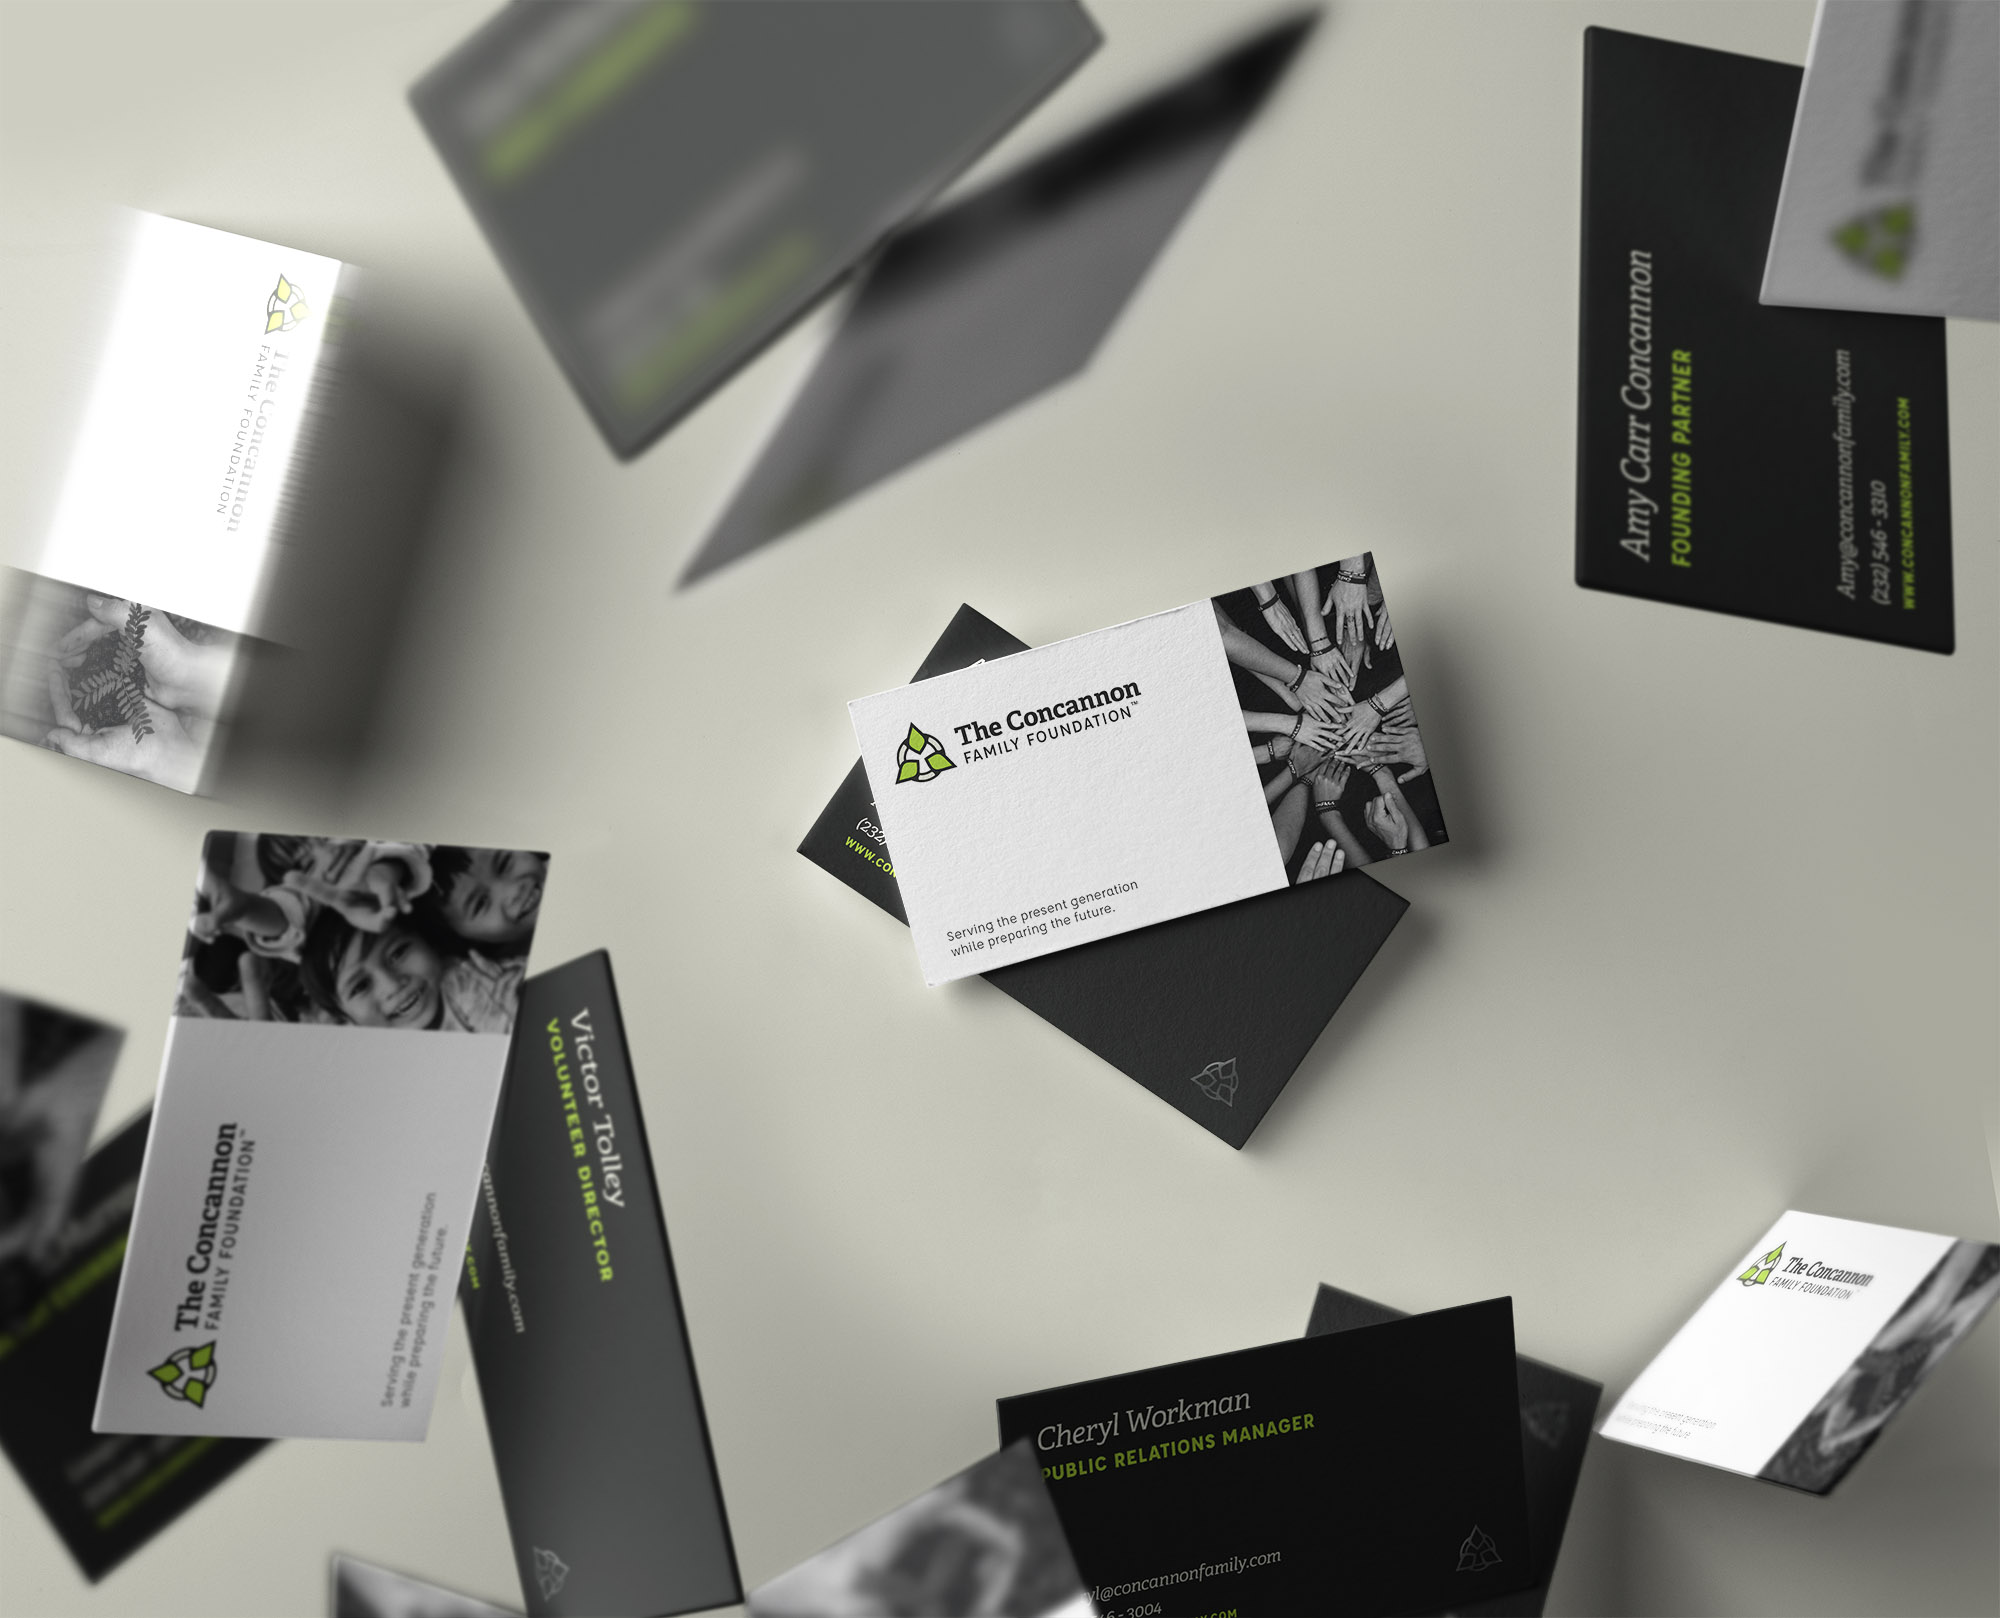 Falling business cards with a logo designed for a non-profit foundation